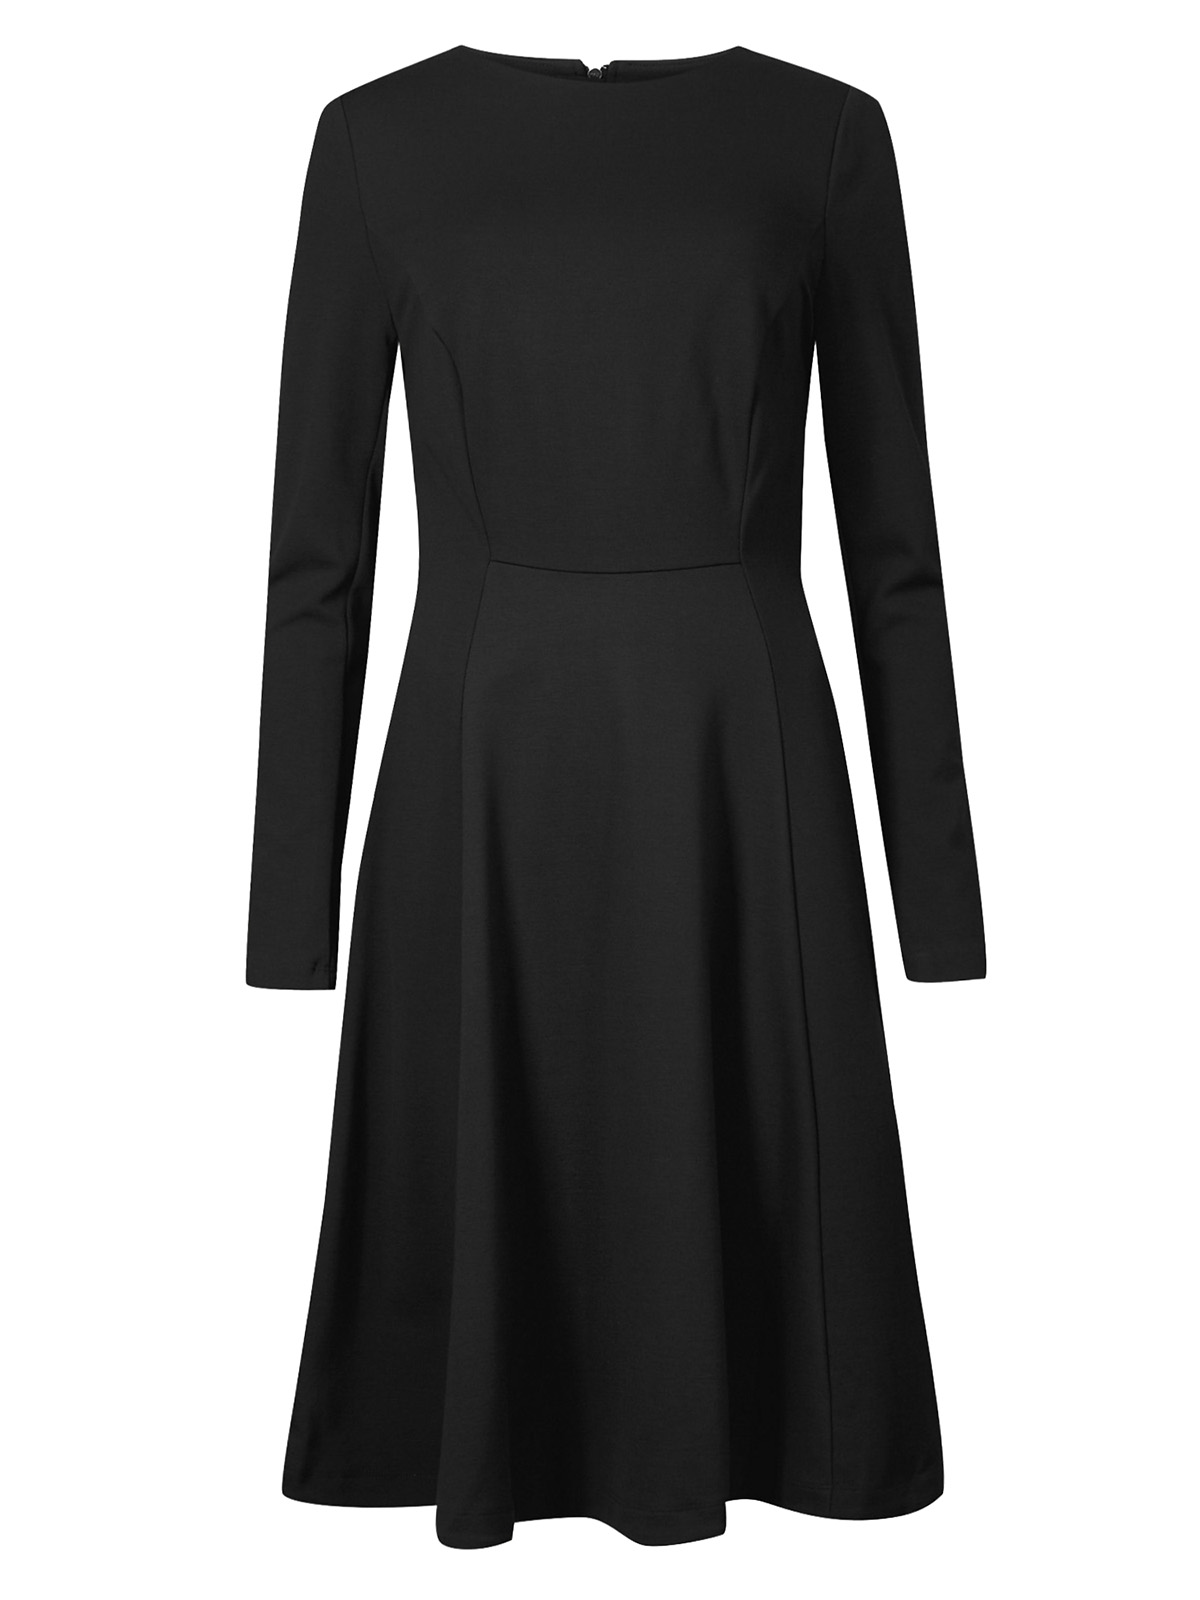 Marks and Spencer - - M&5 BLACK 4-Way Stretch Fit & Flare Mini Dress ...